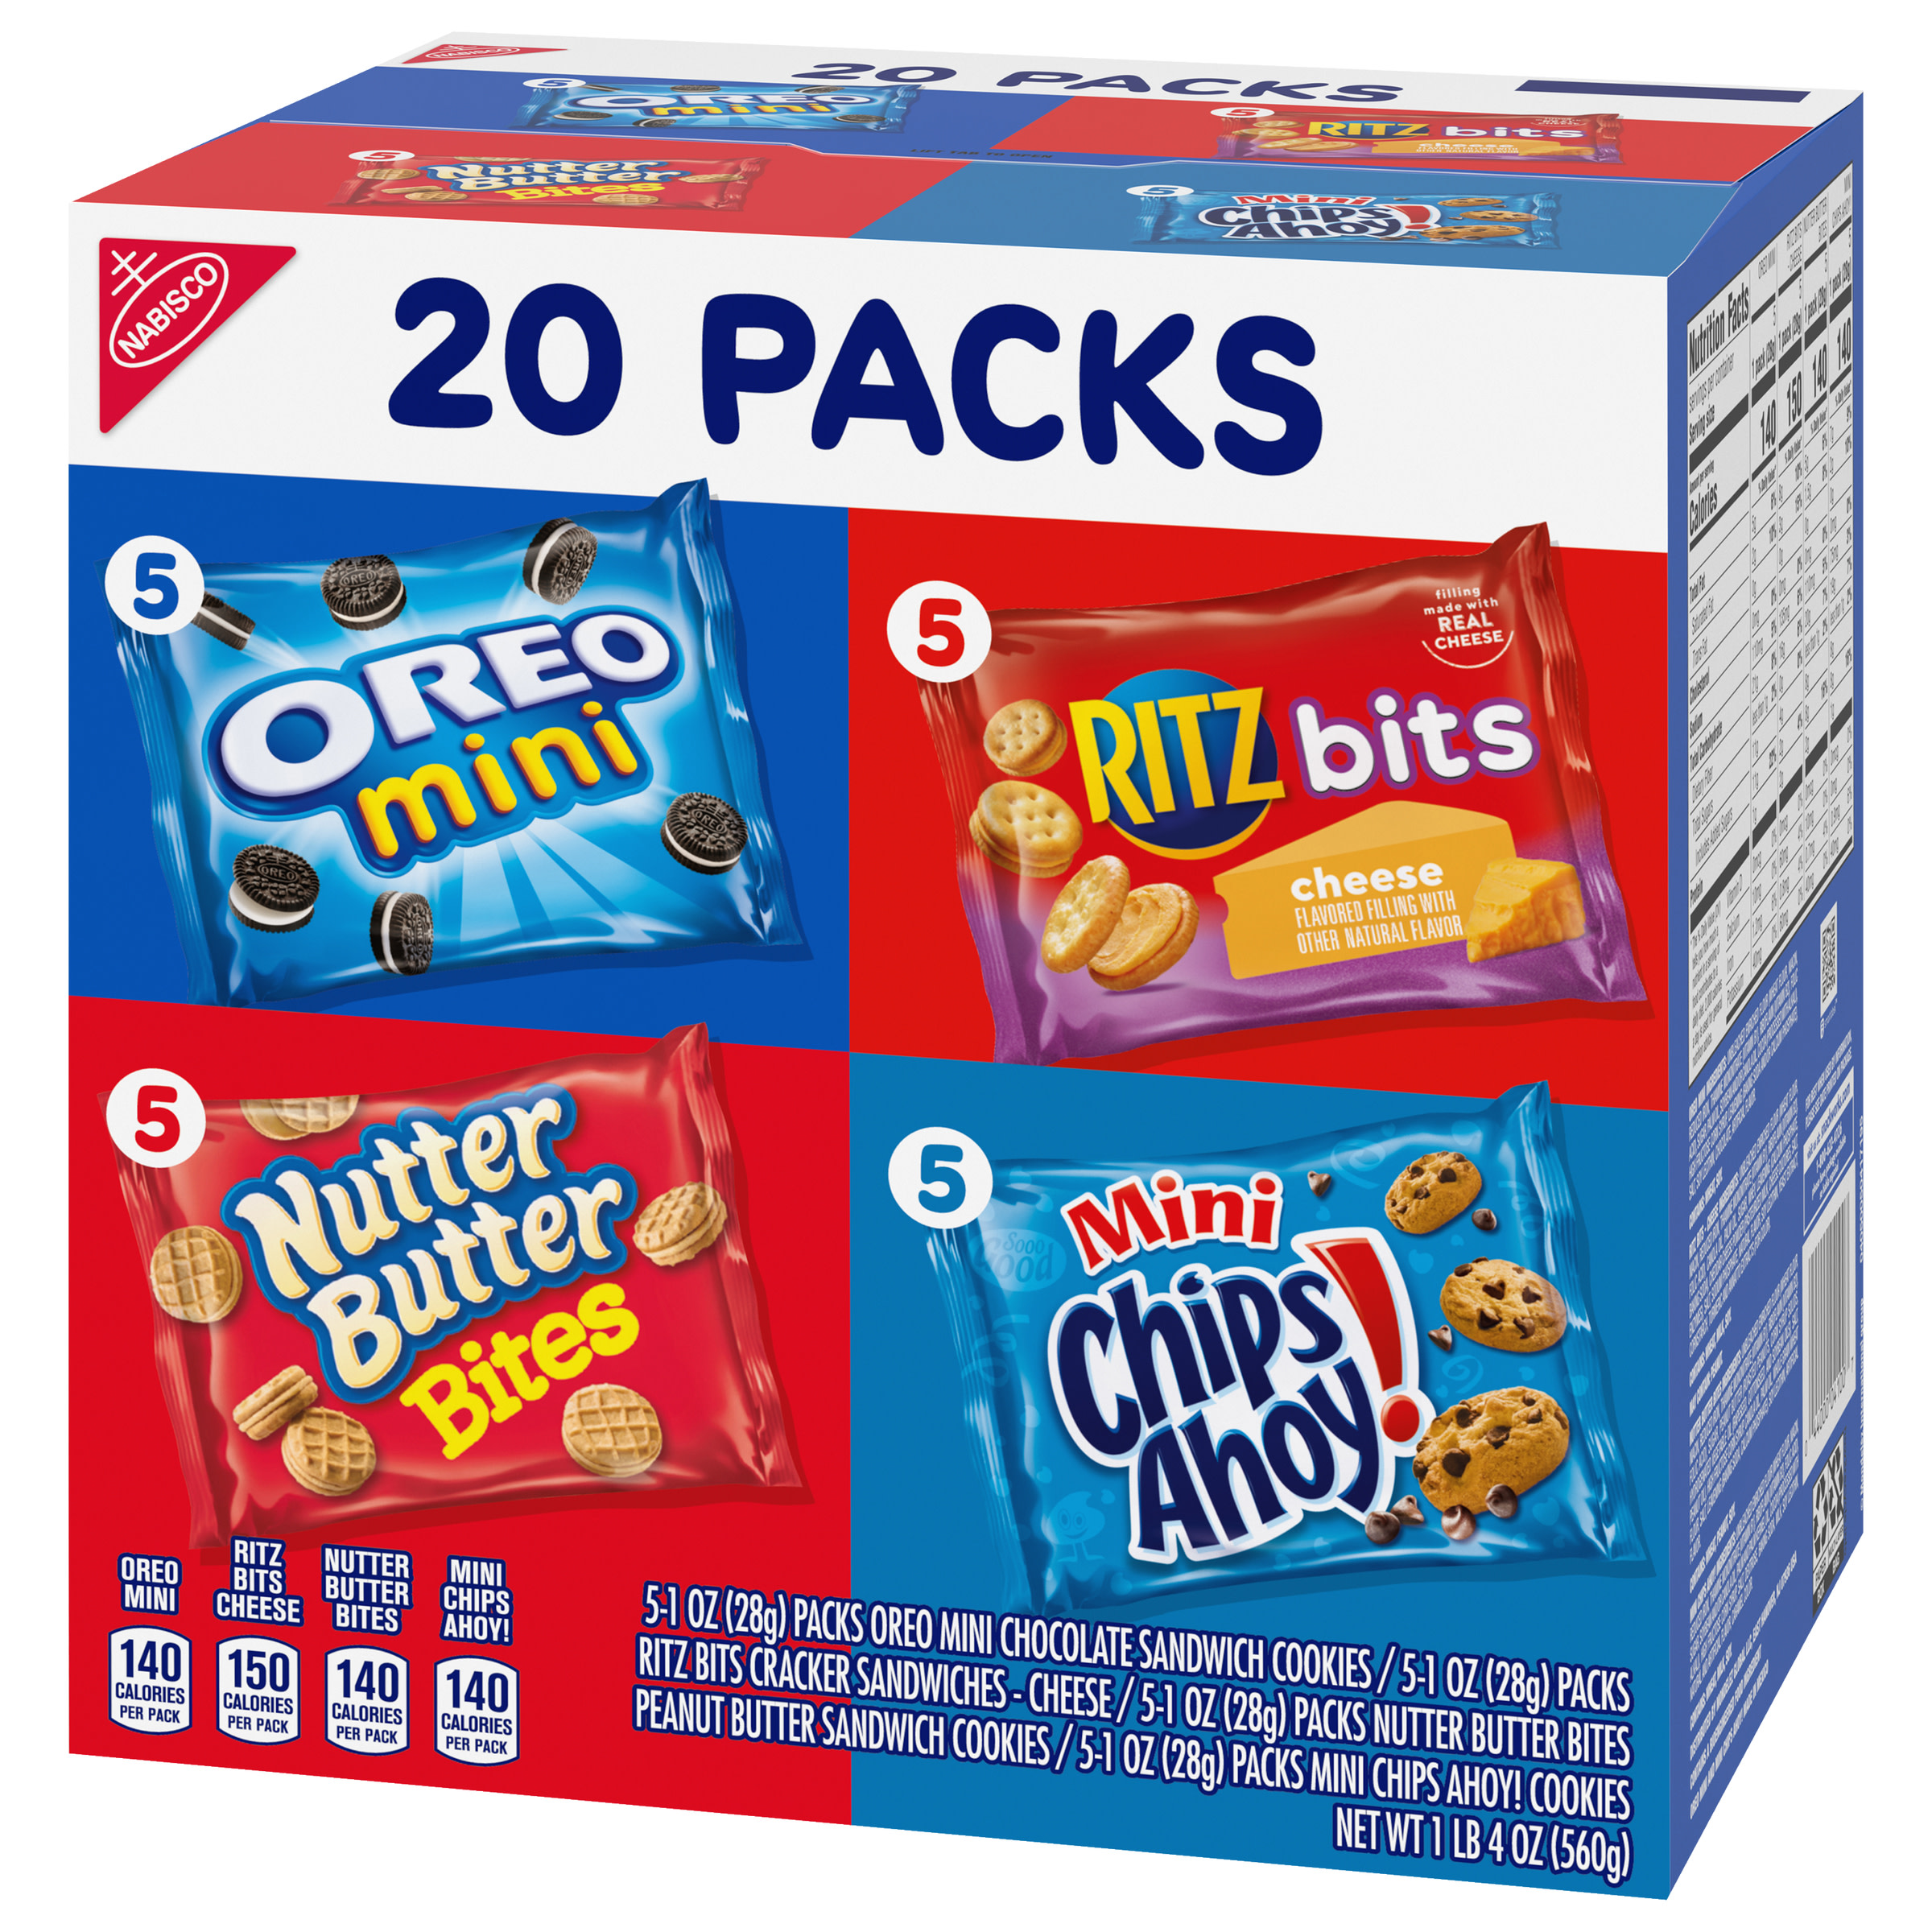 Nabisco Classic Mix Variety Pack, OREO Mini, CHIPS AHOY! Mini, Nutter Butter Bites, RITZ Bits Cheese, Easter Snacks, 20 Snack Packs - image 10 of 12